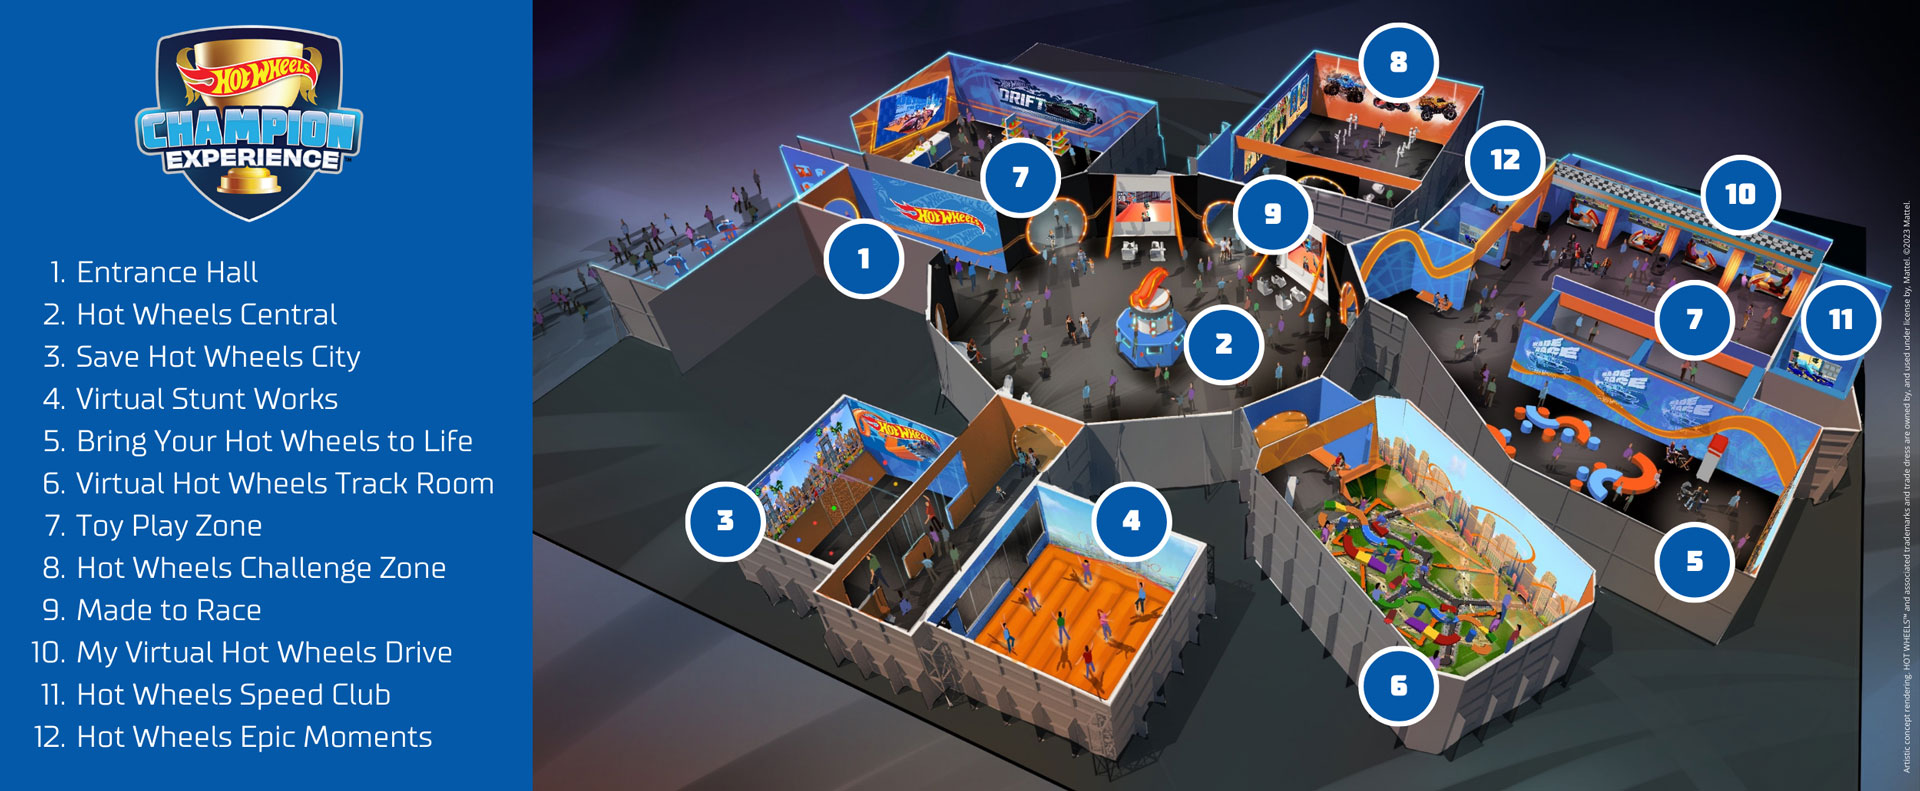 On the right side is an artist's rendering of the bird's eye view of the floor plan of Hot Wheels Champion Experience. Each zone is numbered, and zone names are listed on the left side of the image. 